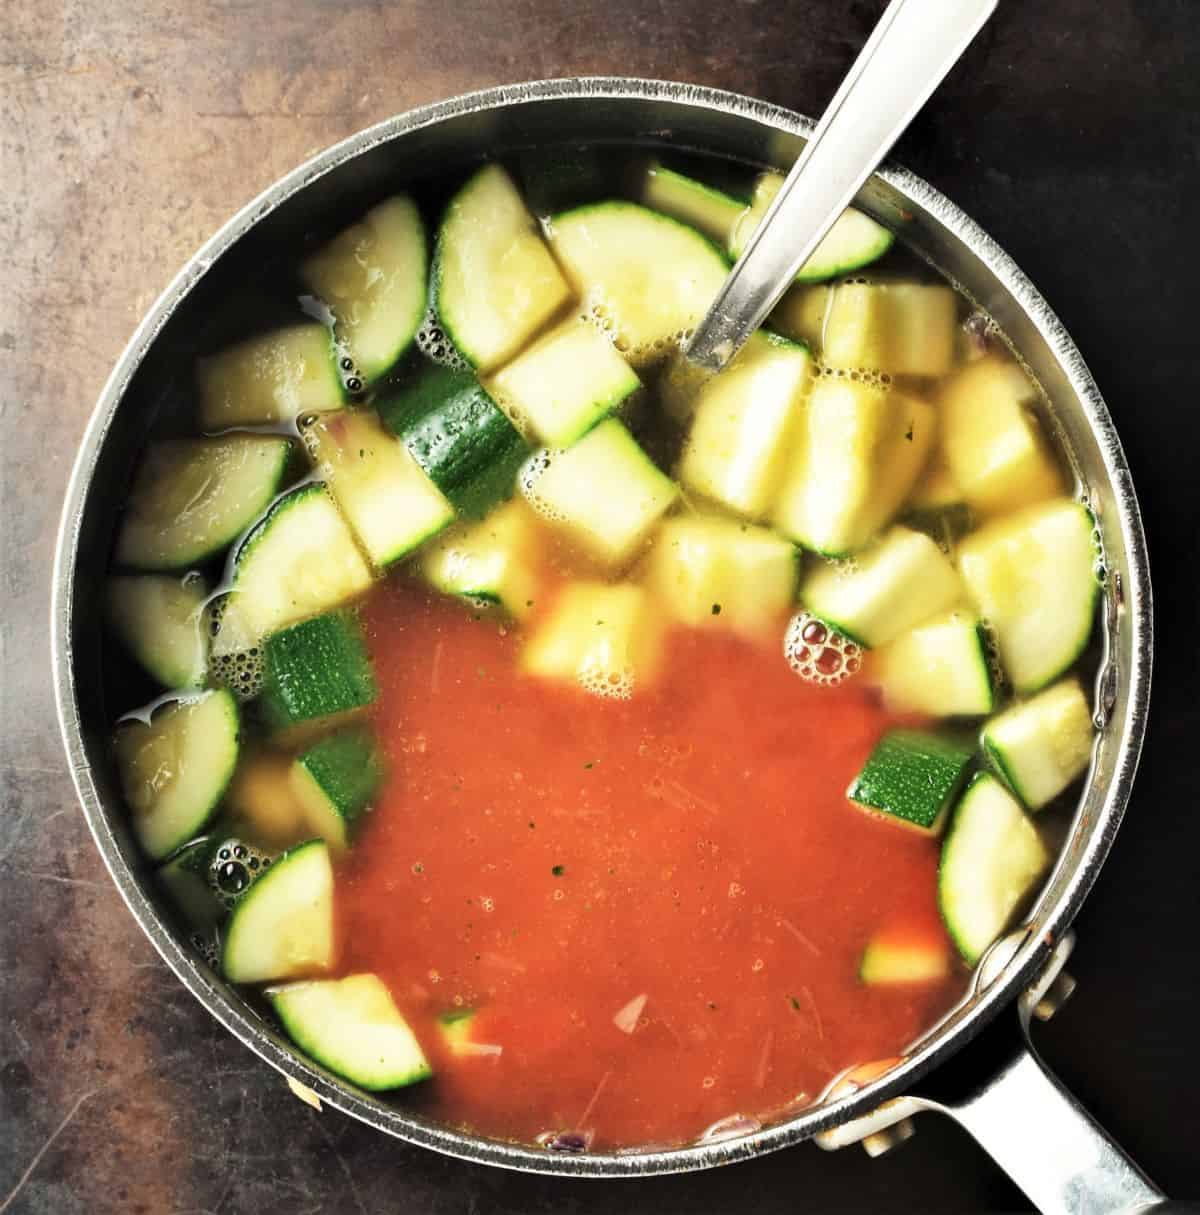 Cubed zucchini and tomato puree in pot with spoon.